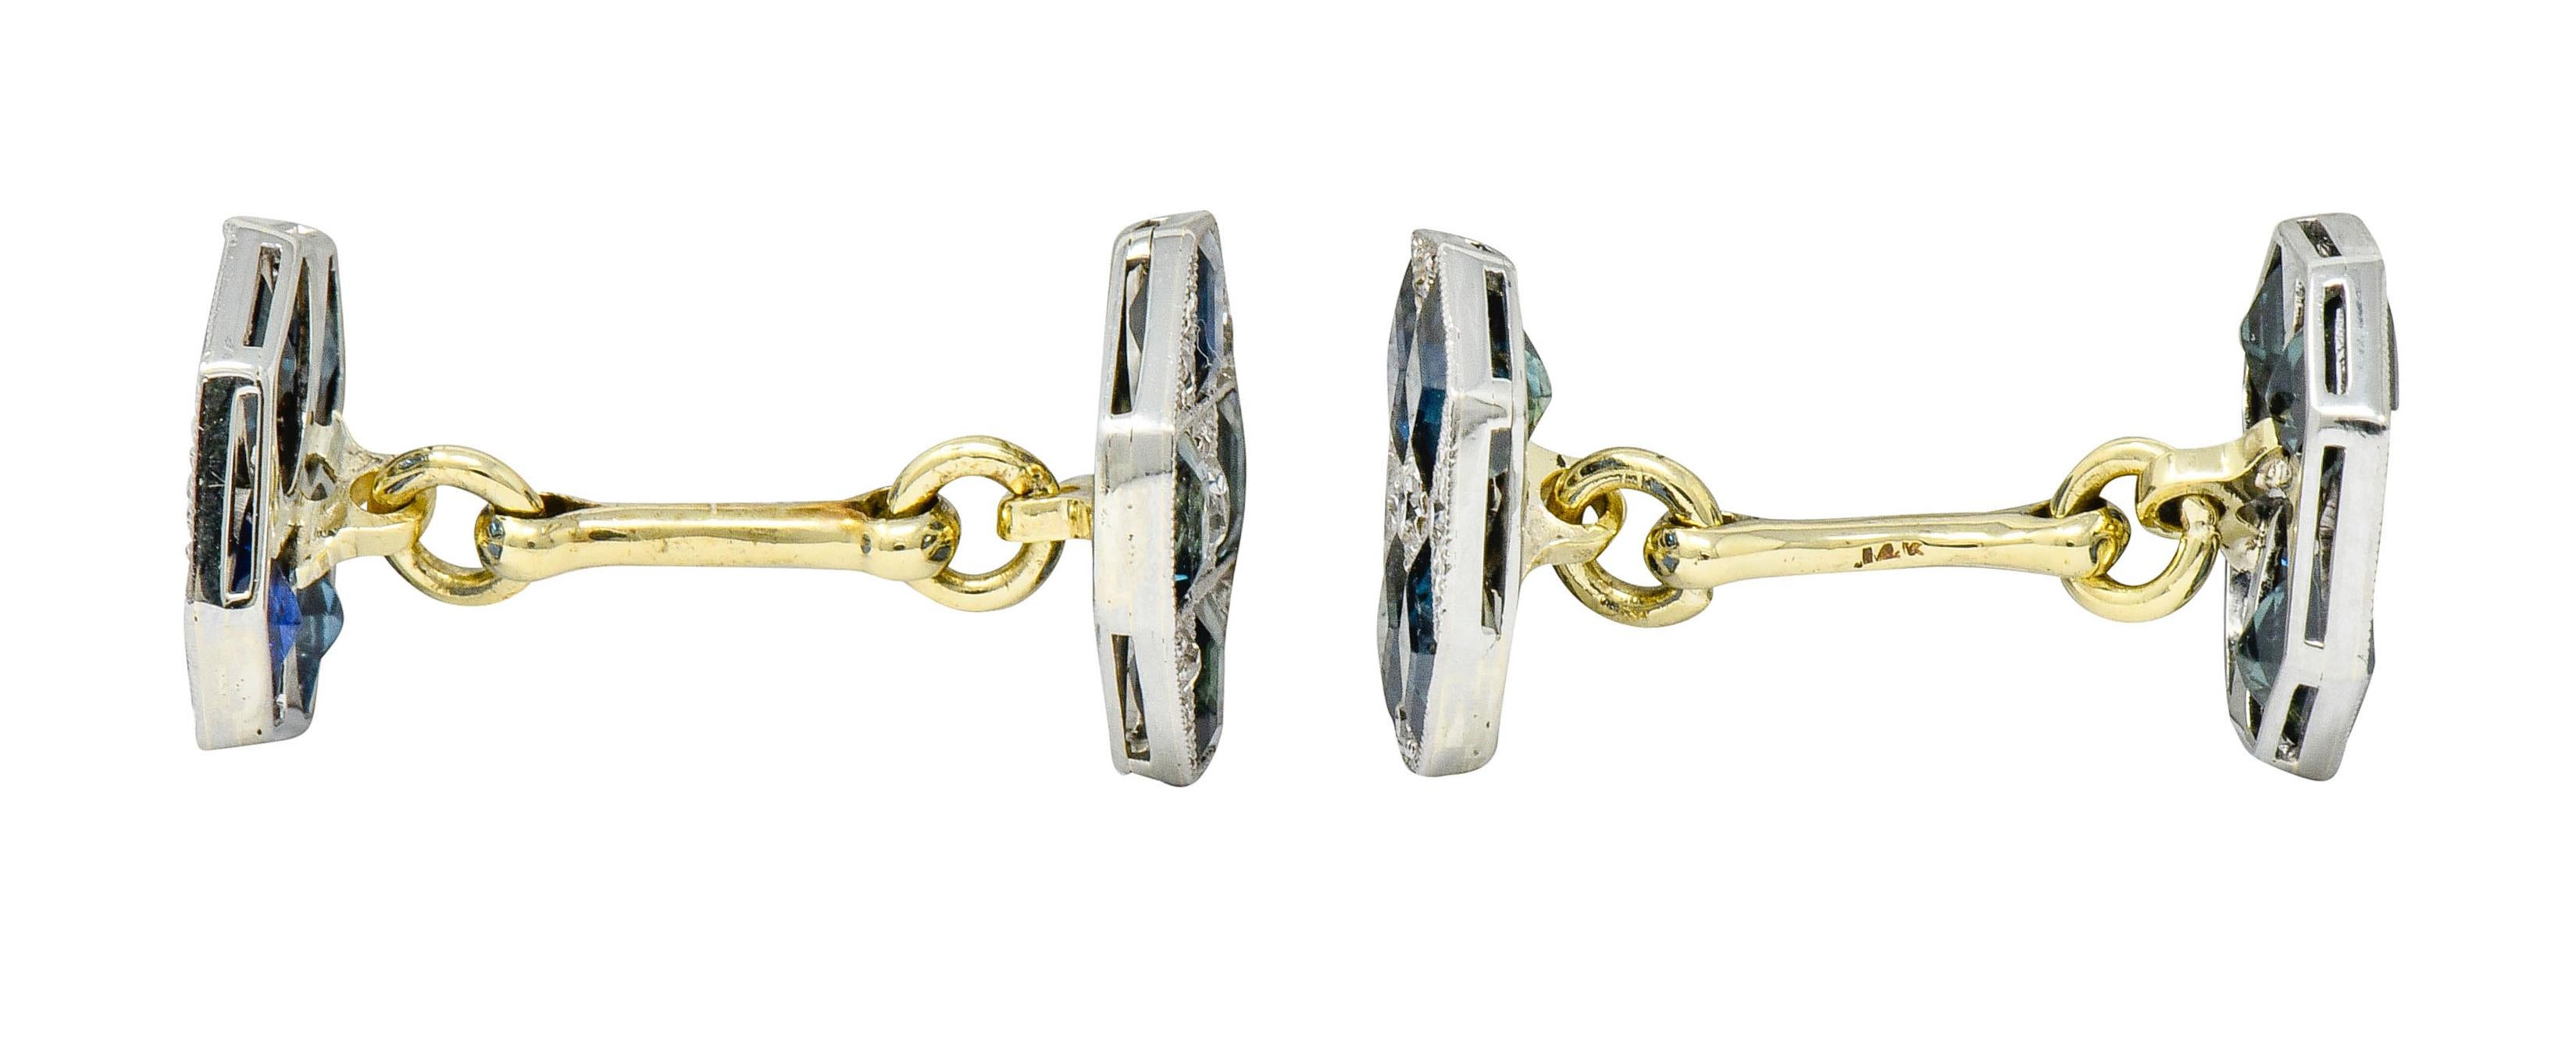 Link style cufflinks terminating as milgrain platinum octagonal forms

Each centering a bead set round brilliant cut diamond, with single cut diamond accents, weighing in total approximatley 0.72 carat; G to I color with VS and SI